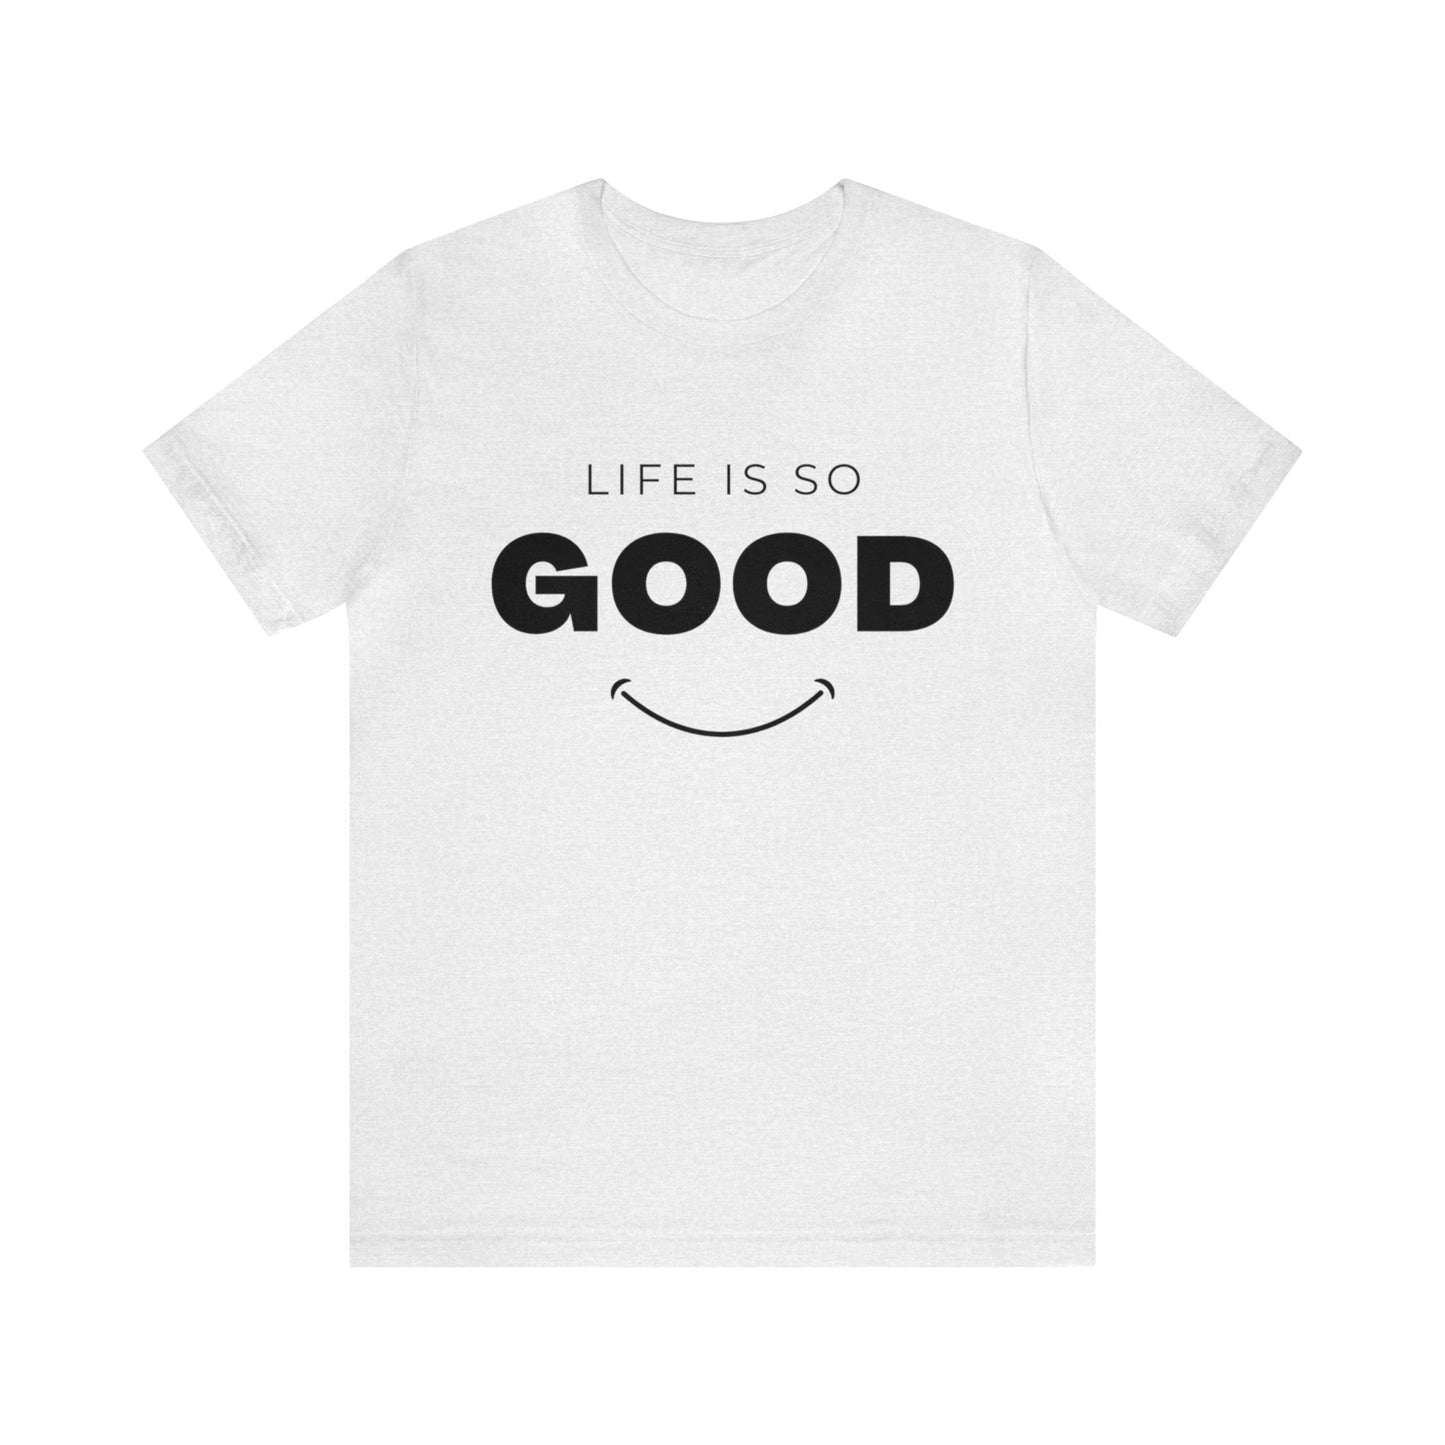 Life Is So Good - Graphic T Shirt For Men and Women